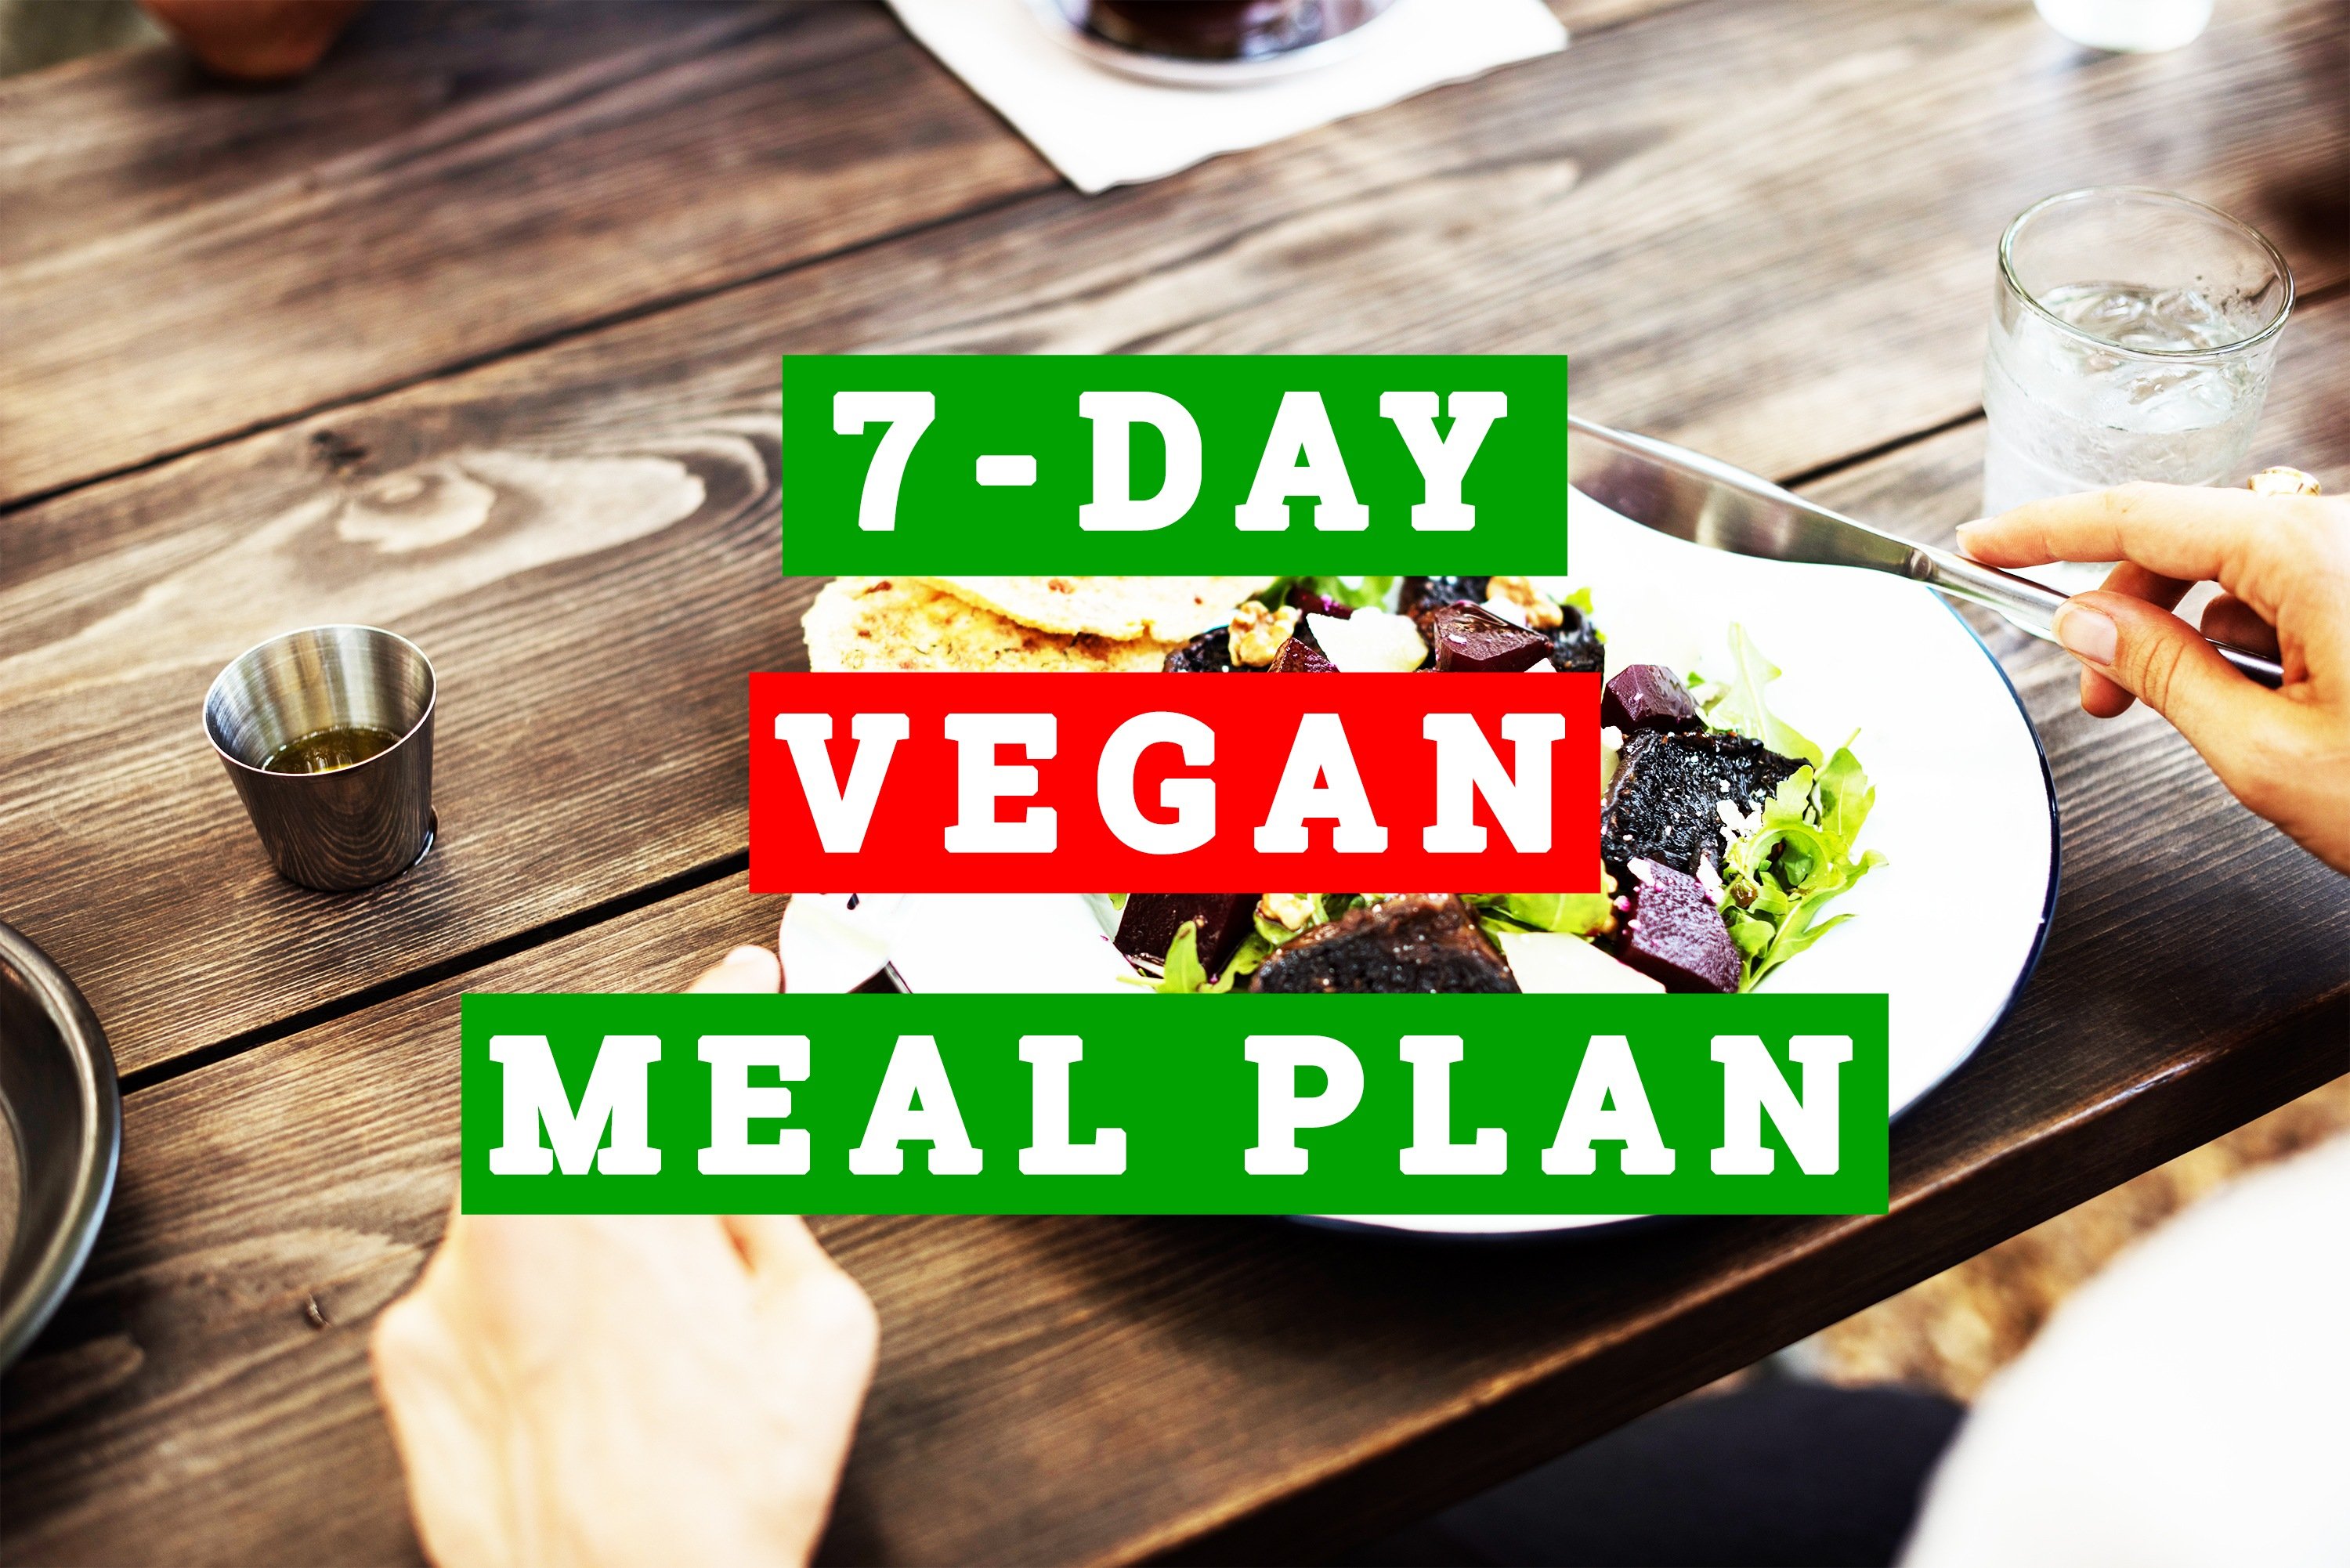 2000 calorie plant based diet meal plan